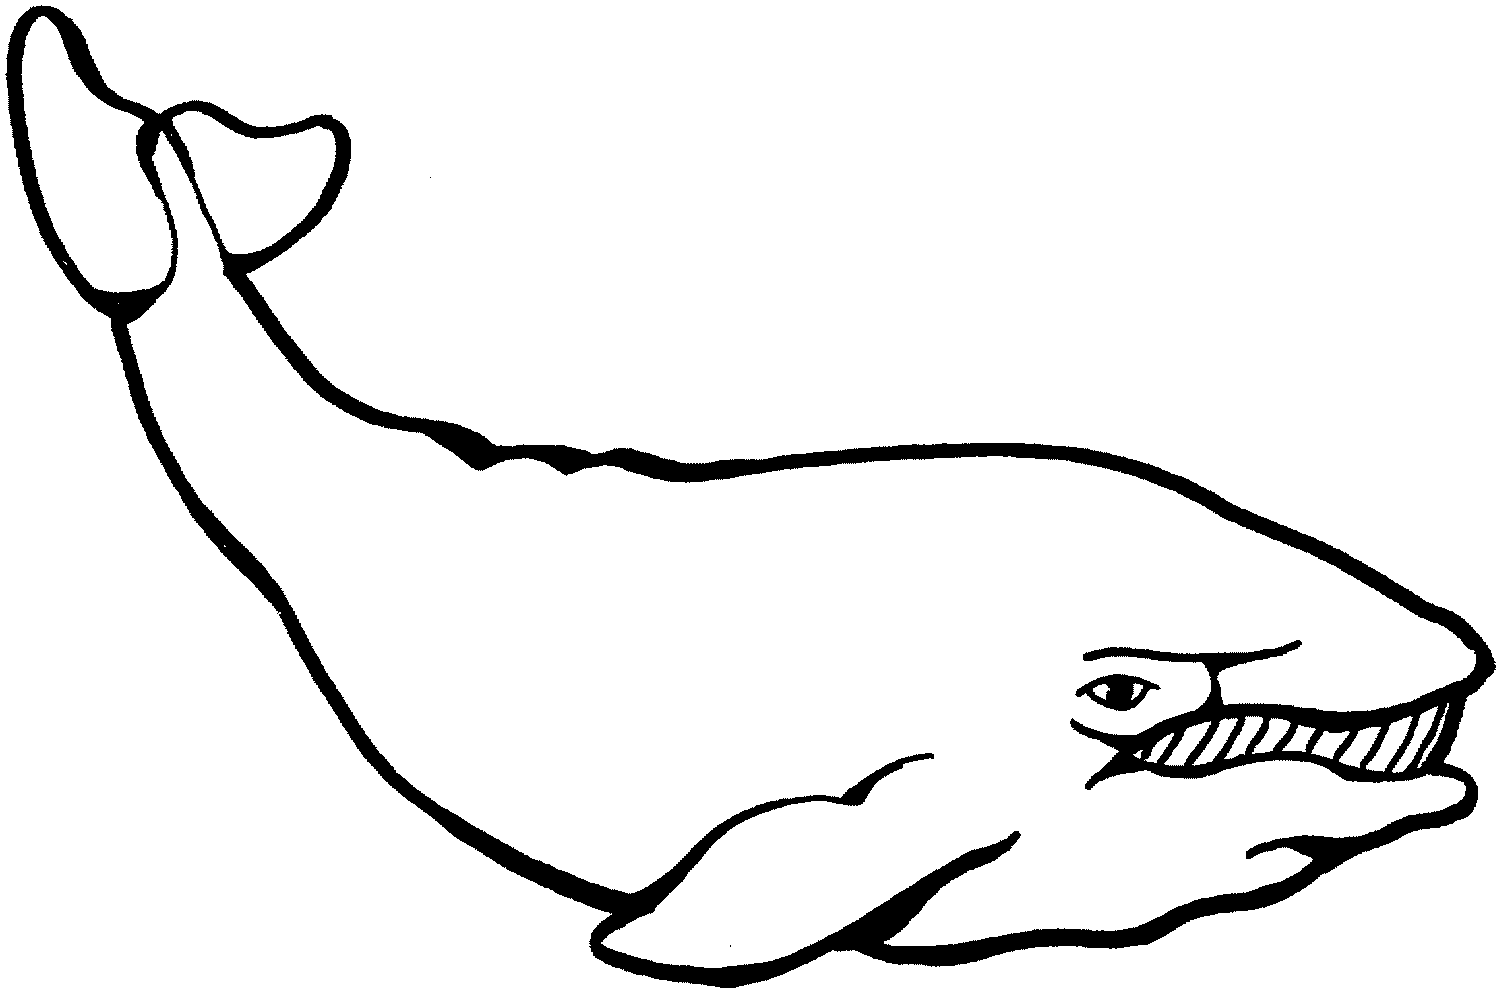 Whale coloring pages for kids - Coloring Pages  Pictures - IMAGIXS